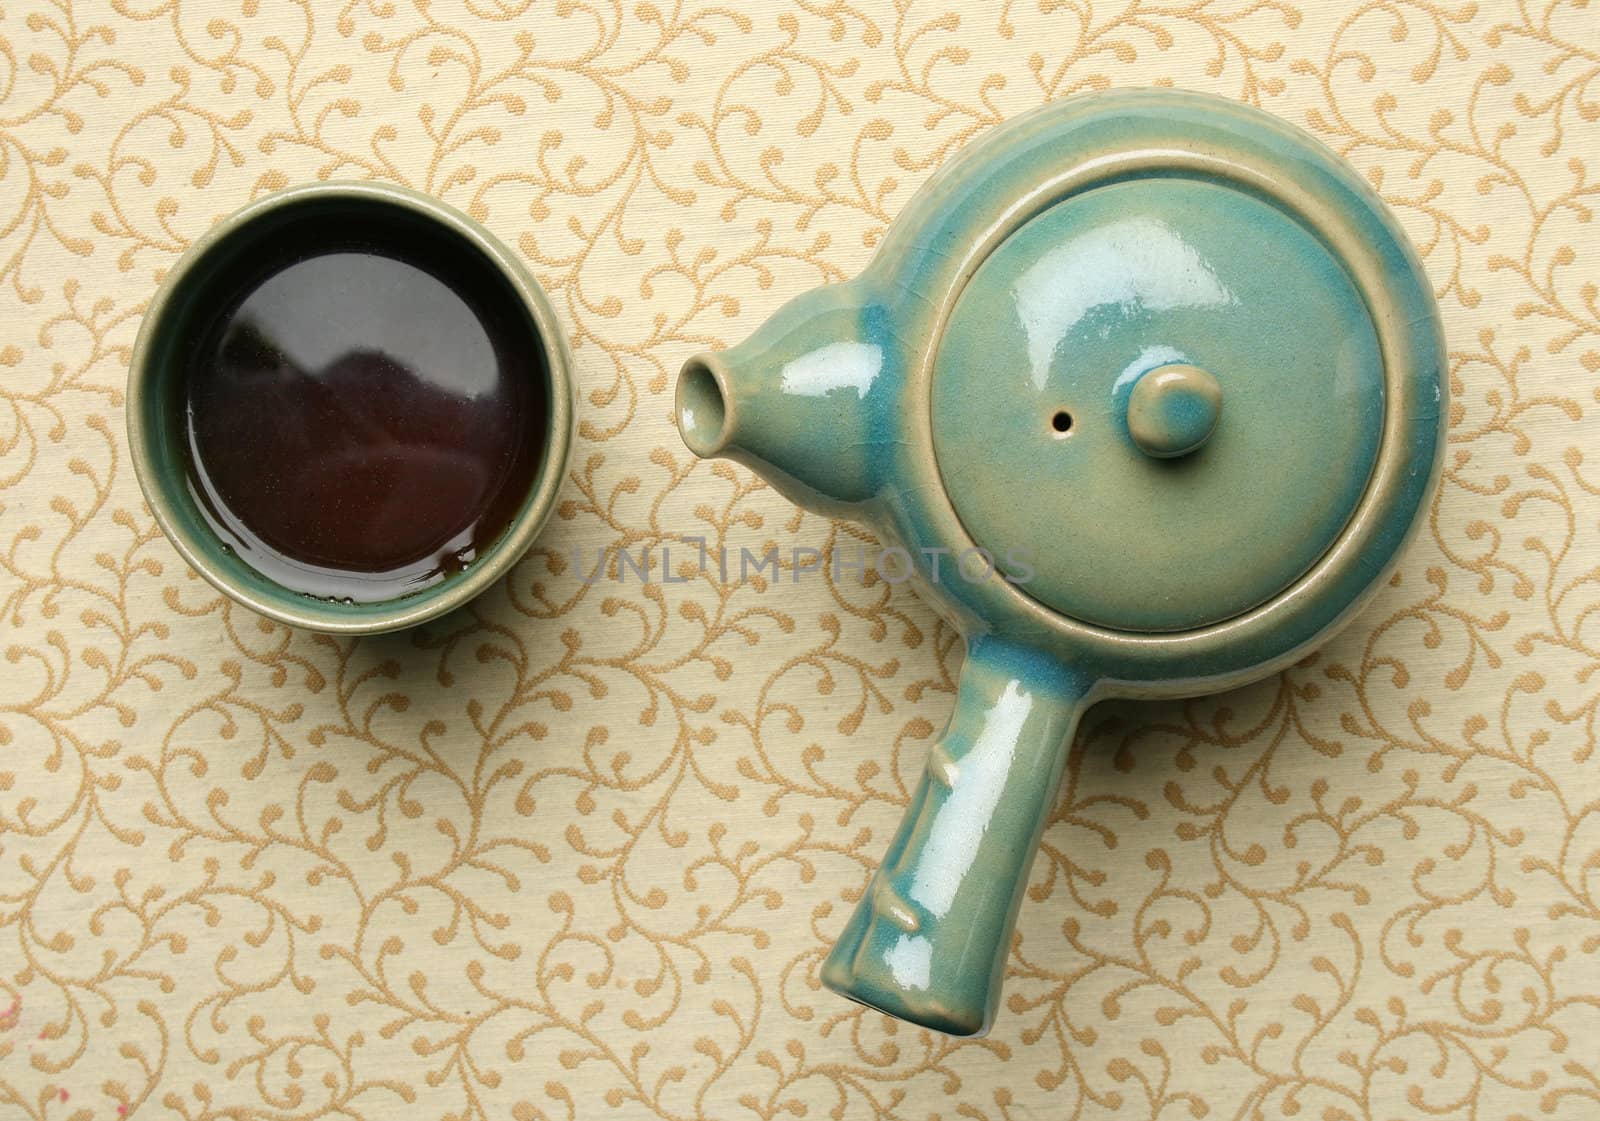 Chinese teapot and a cup of tea by Erdosain